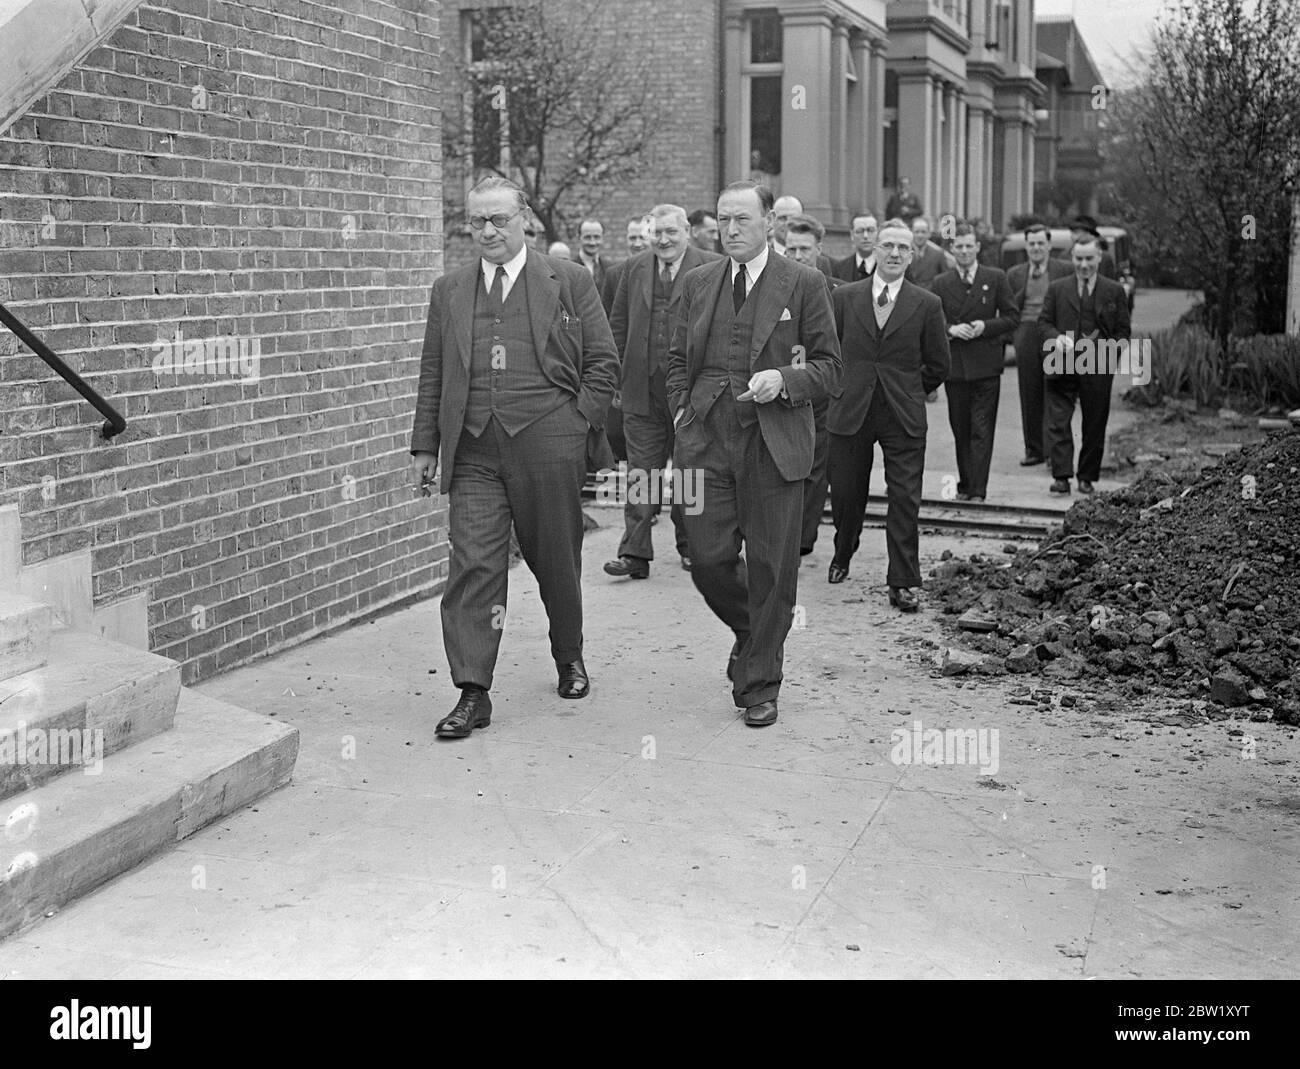 Bus delegates meet in London to consider strike action . A meeting of bus delegates of the transport And General Workers Union was held at the Woodberry Hall, Green Lane, Stoke Newington, when it was expected that final endorsement of strike action would be given following the complete failure of the negotiations which have been proceeding all the week. Photo shows, delegates leaving after the meeting. Ernest Bevan (left) is on left with glasses. 30 April 1937 Stock Photo